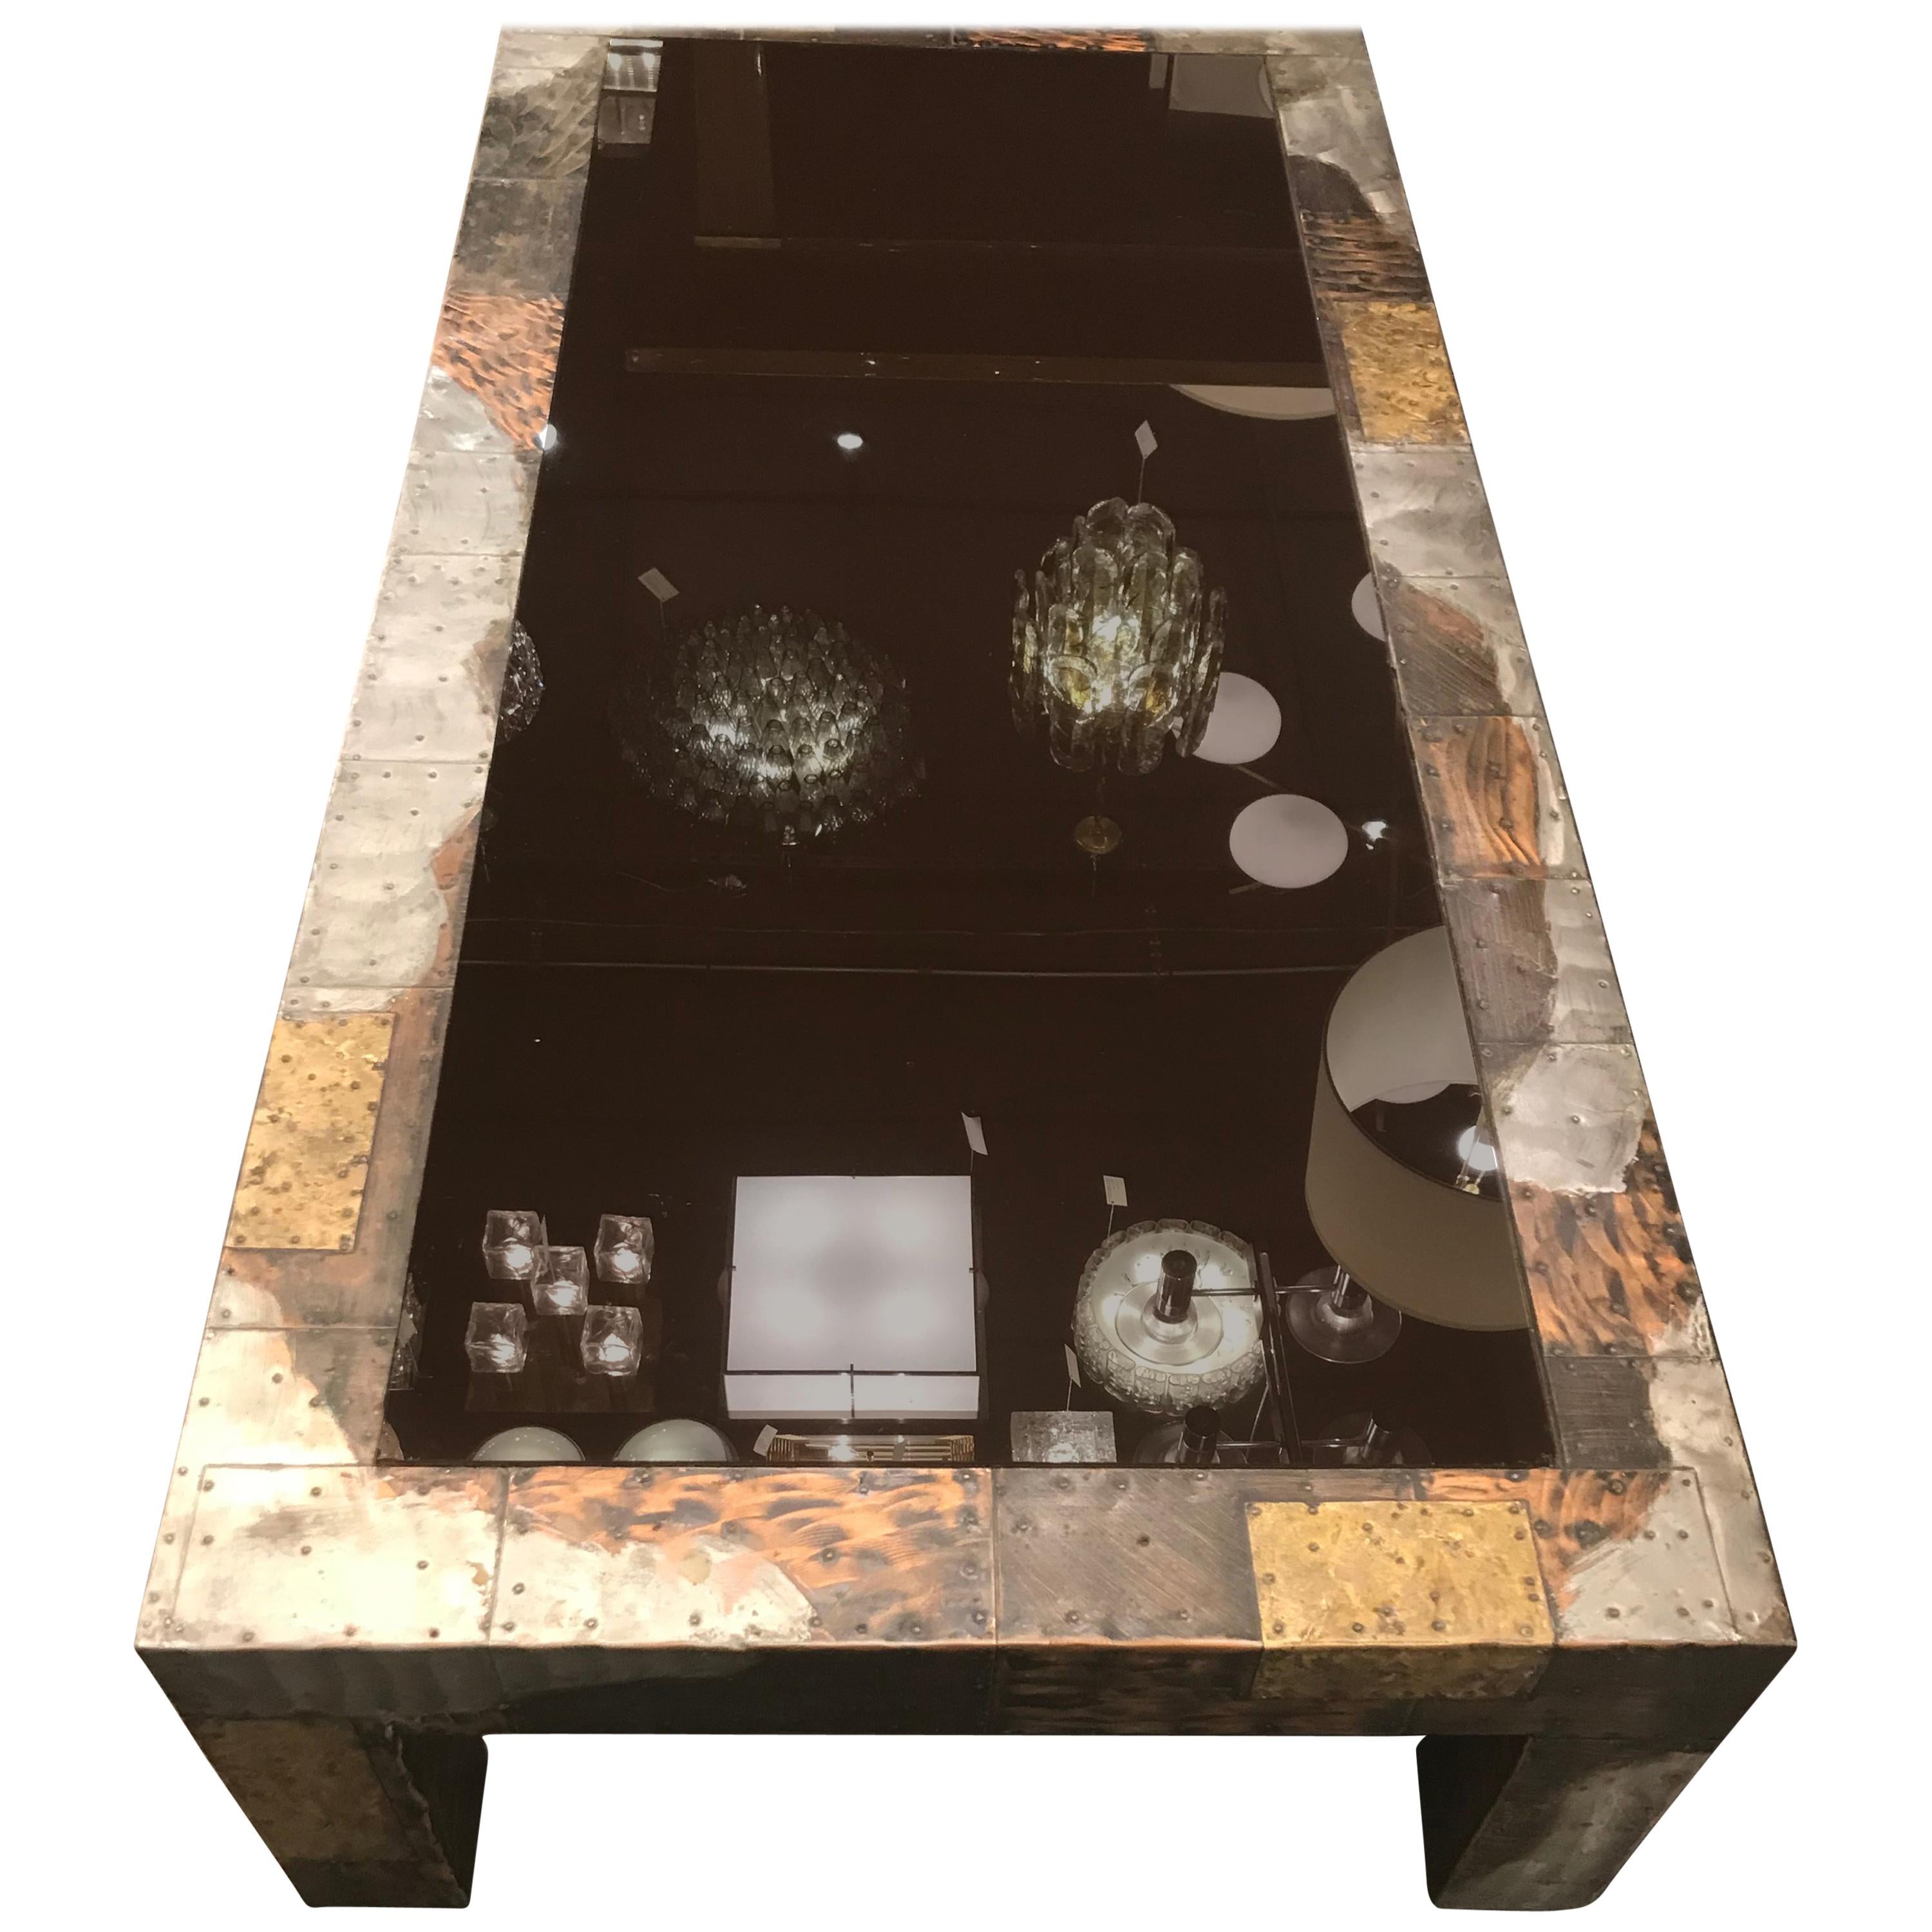 Midcentury Paul Evans "Patchwork" Table in Patinated Copper, Bronze & Pewter